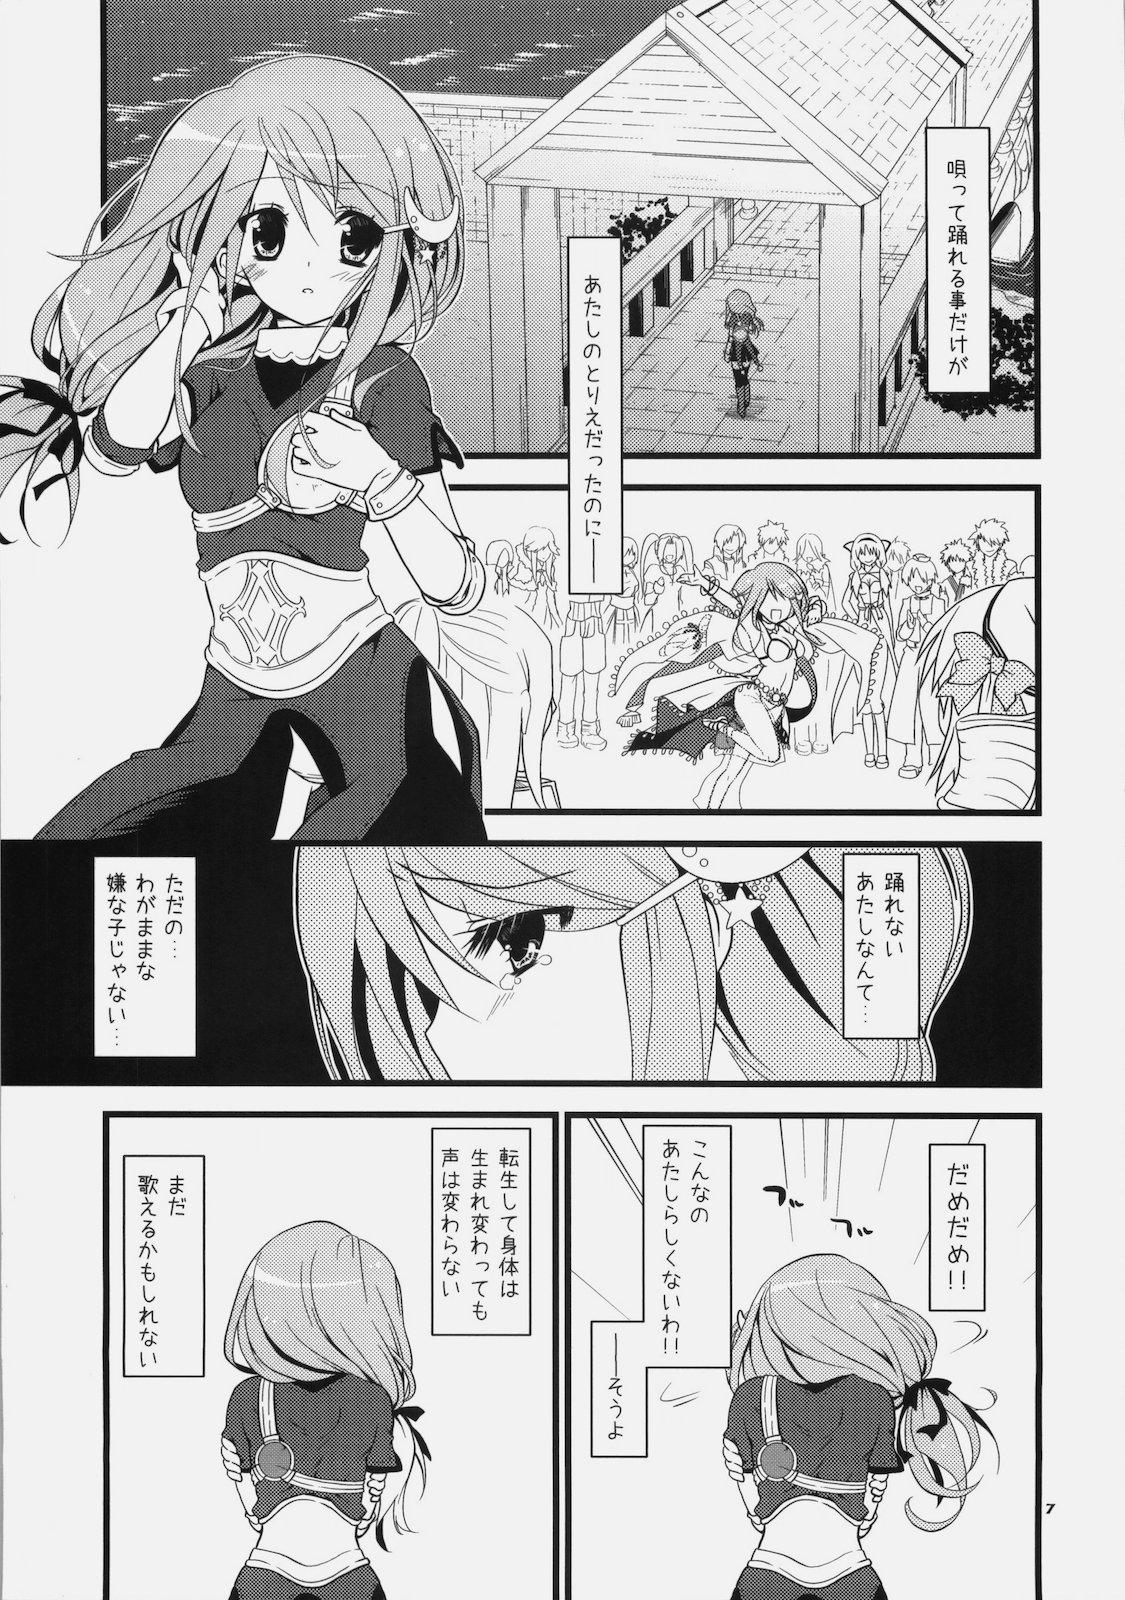 Harcore Daily RO 3 - Ragnarok online Ride - Page 7